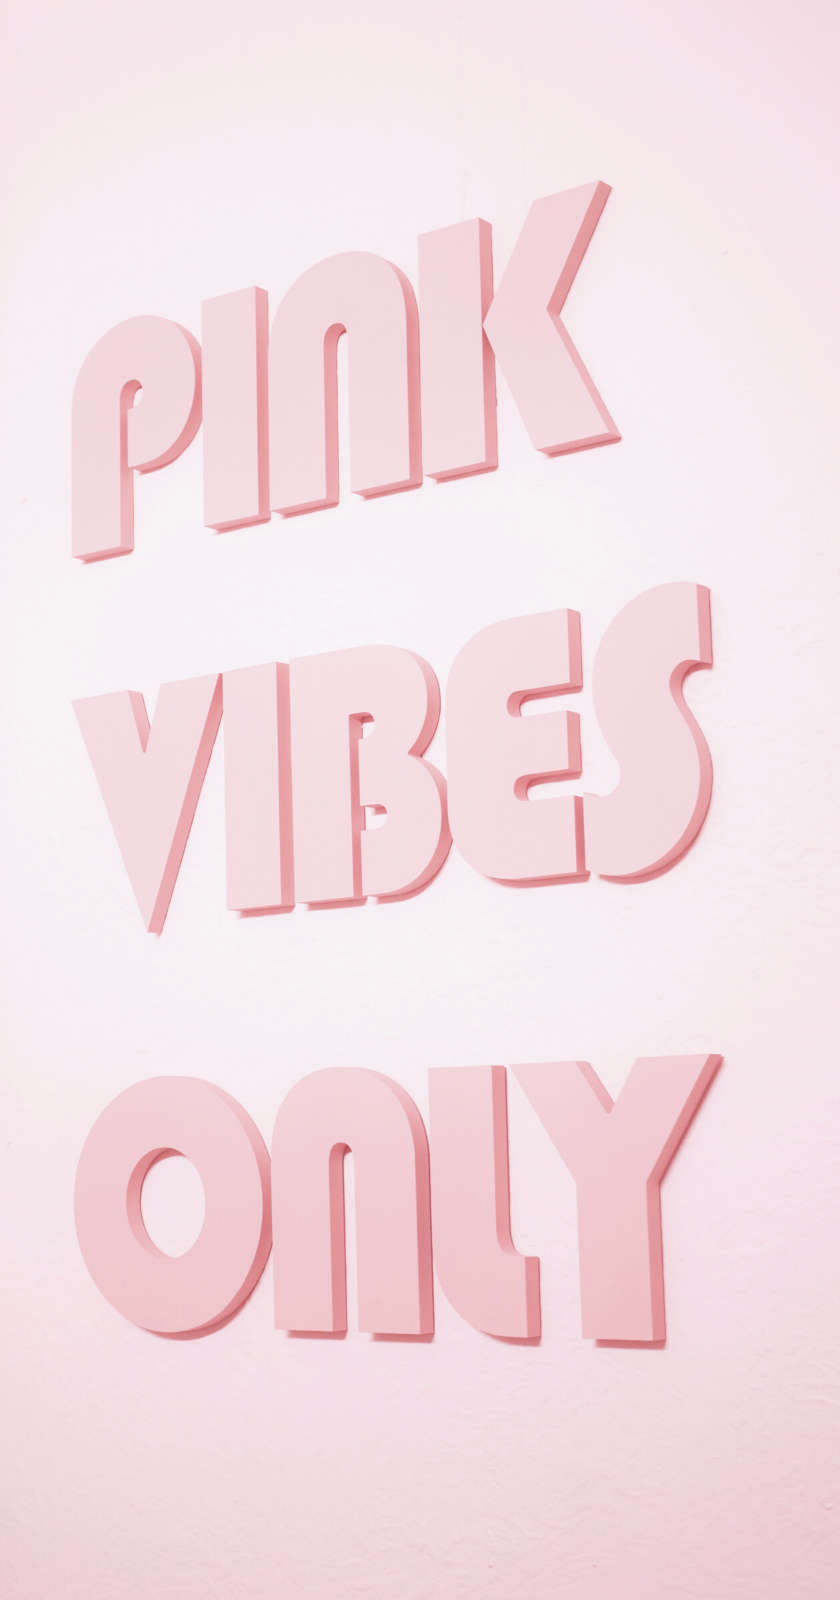 Pink Aesthetics. Wallpaper for iPhone, feel the pink vibes! 2020. Light pink walls, Pastel pink aesthetic, Pink wallpaper